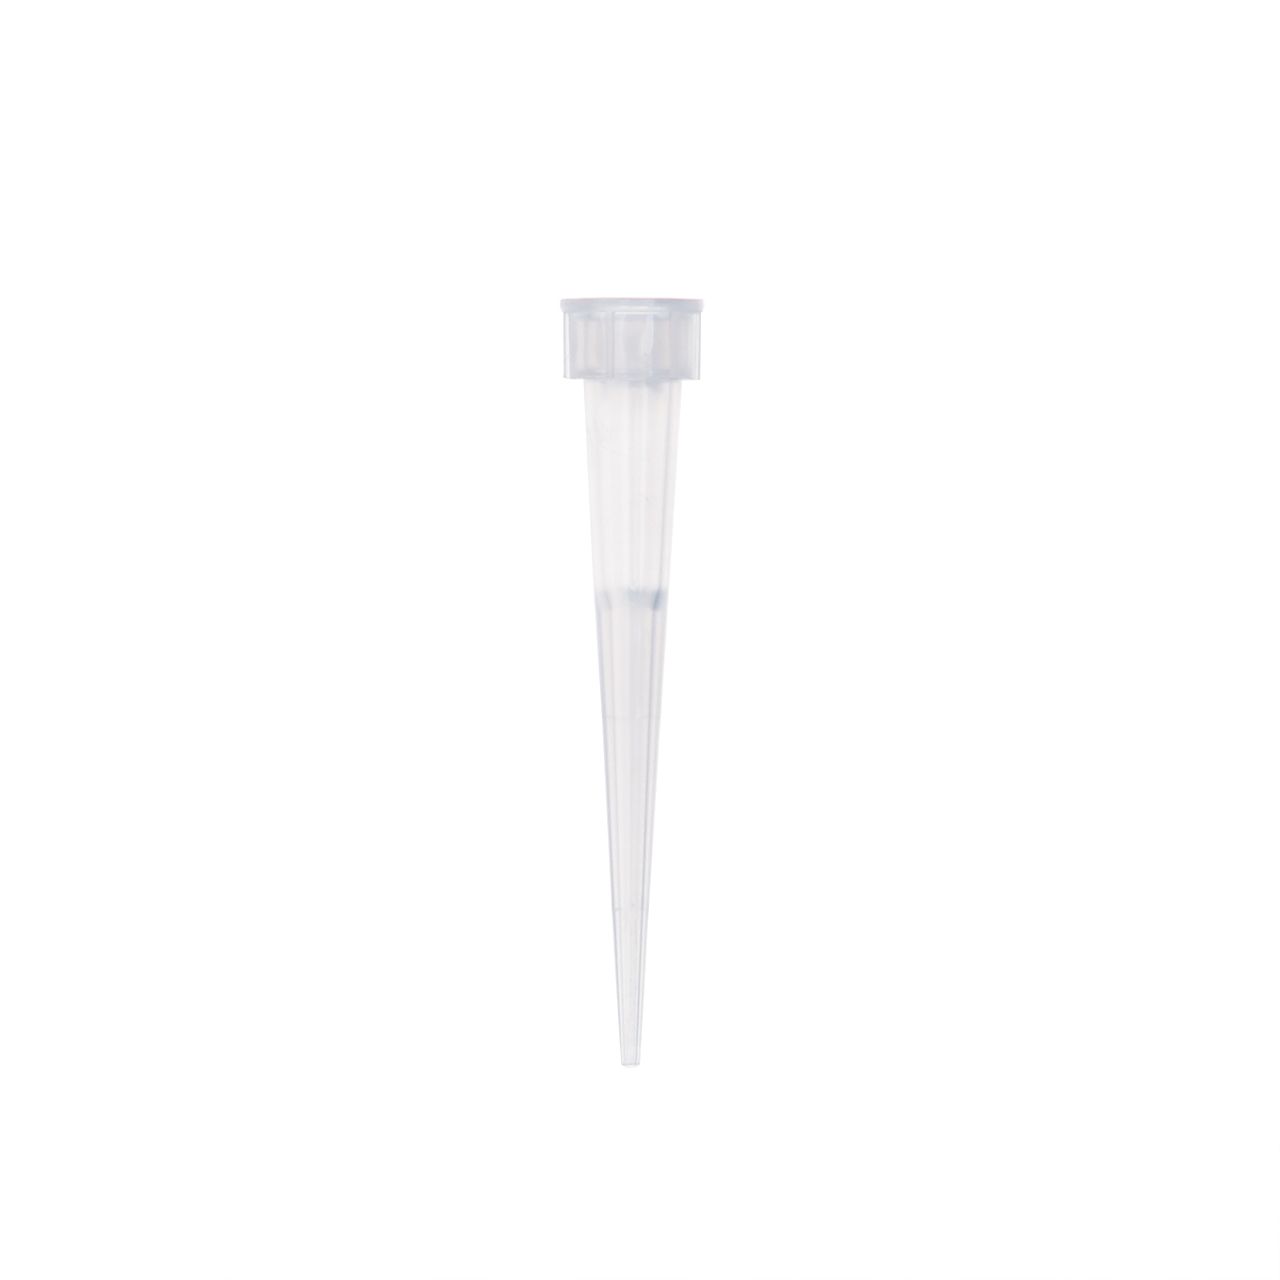 DISPOSABLE PIPETTE TIPS 10uL, NON-STERILE, AUTOCLAVE, DIAMETER: 5MM, LENGTH: 32MM (PACK OF 1000)